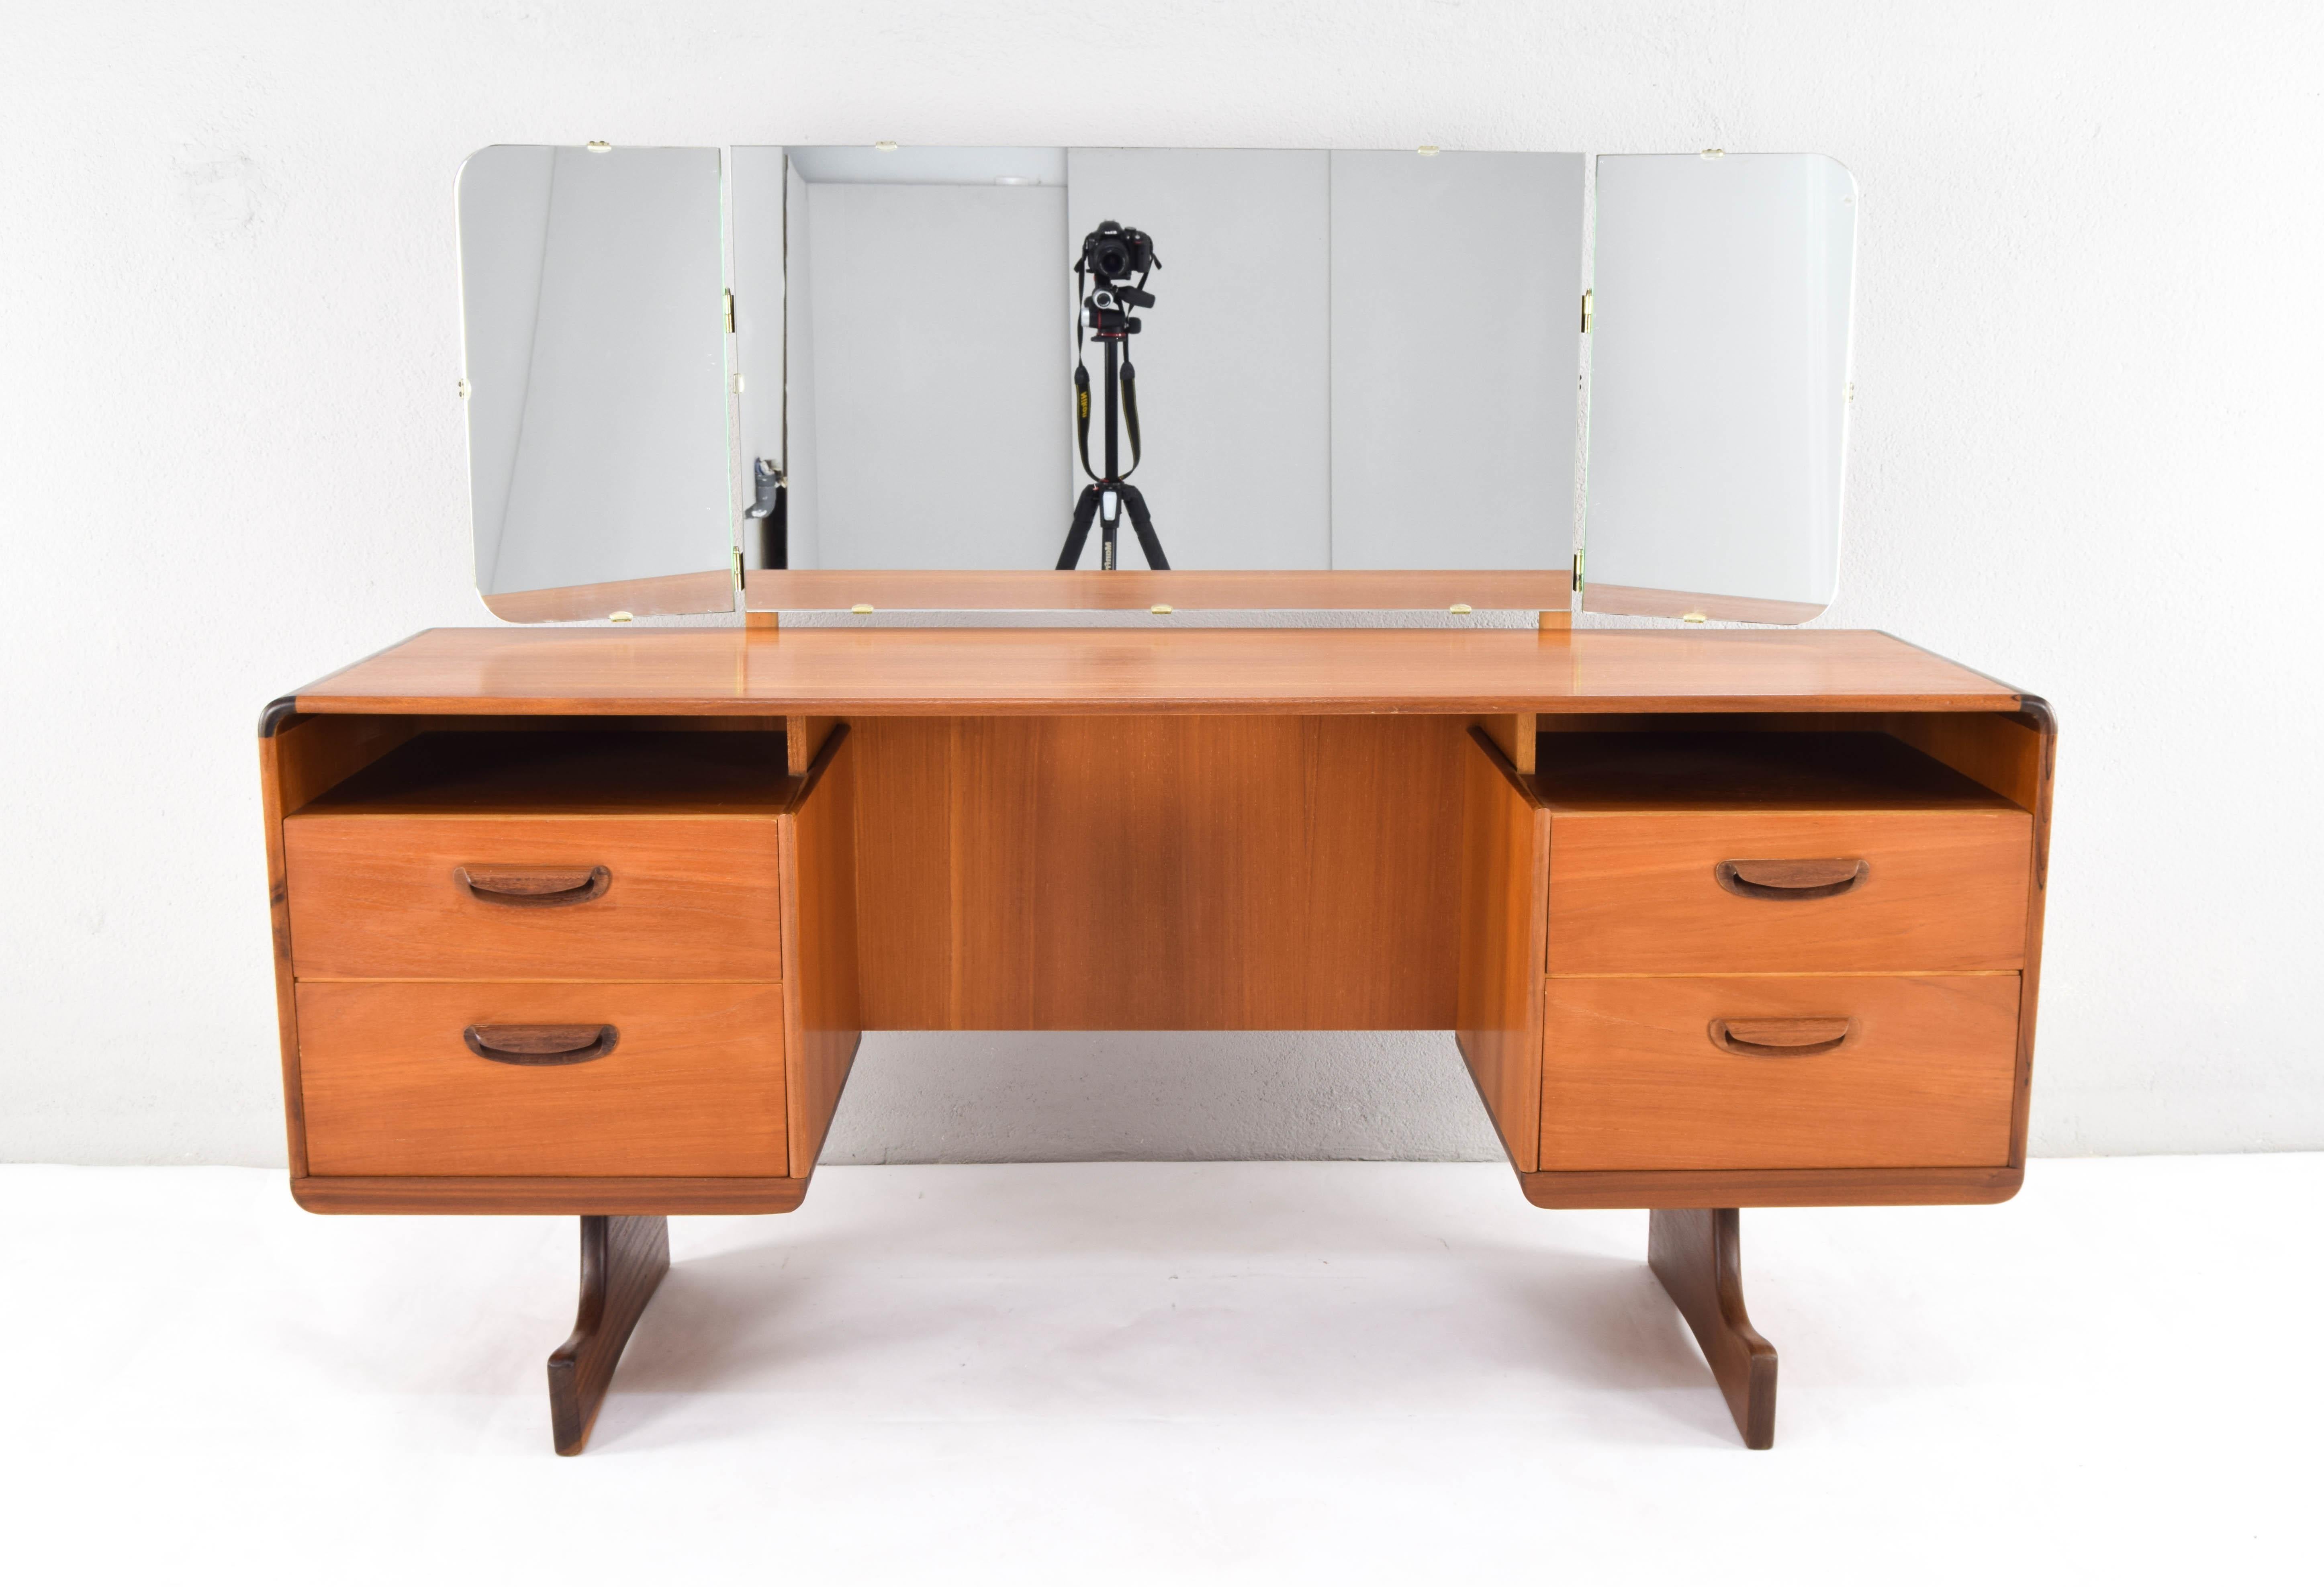 Teak wood dressing table with triptych mirror. Spectacular piece with fluid organic lines, with curved angles and sculpted handles, manufactured by the Scottish cabinetmaker Beithcraft.

This piece, in addition to being one of the best and most